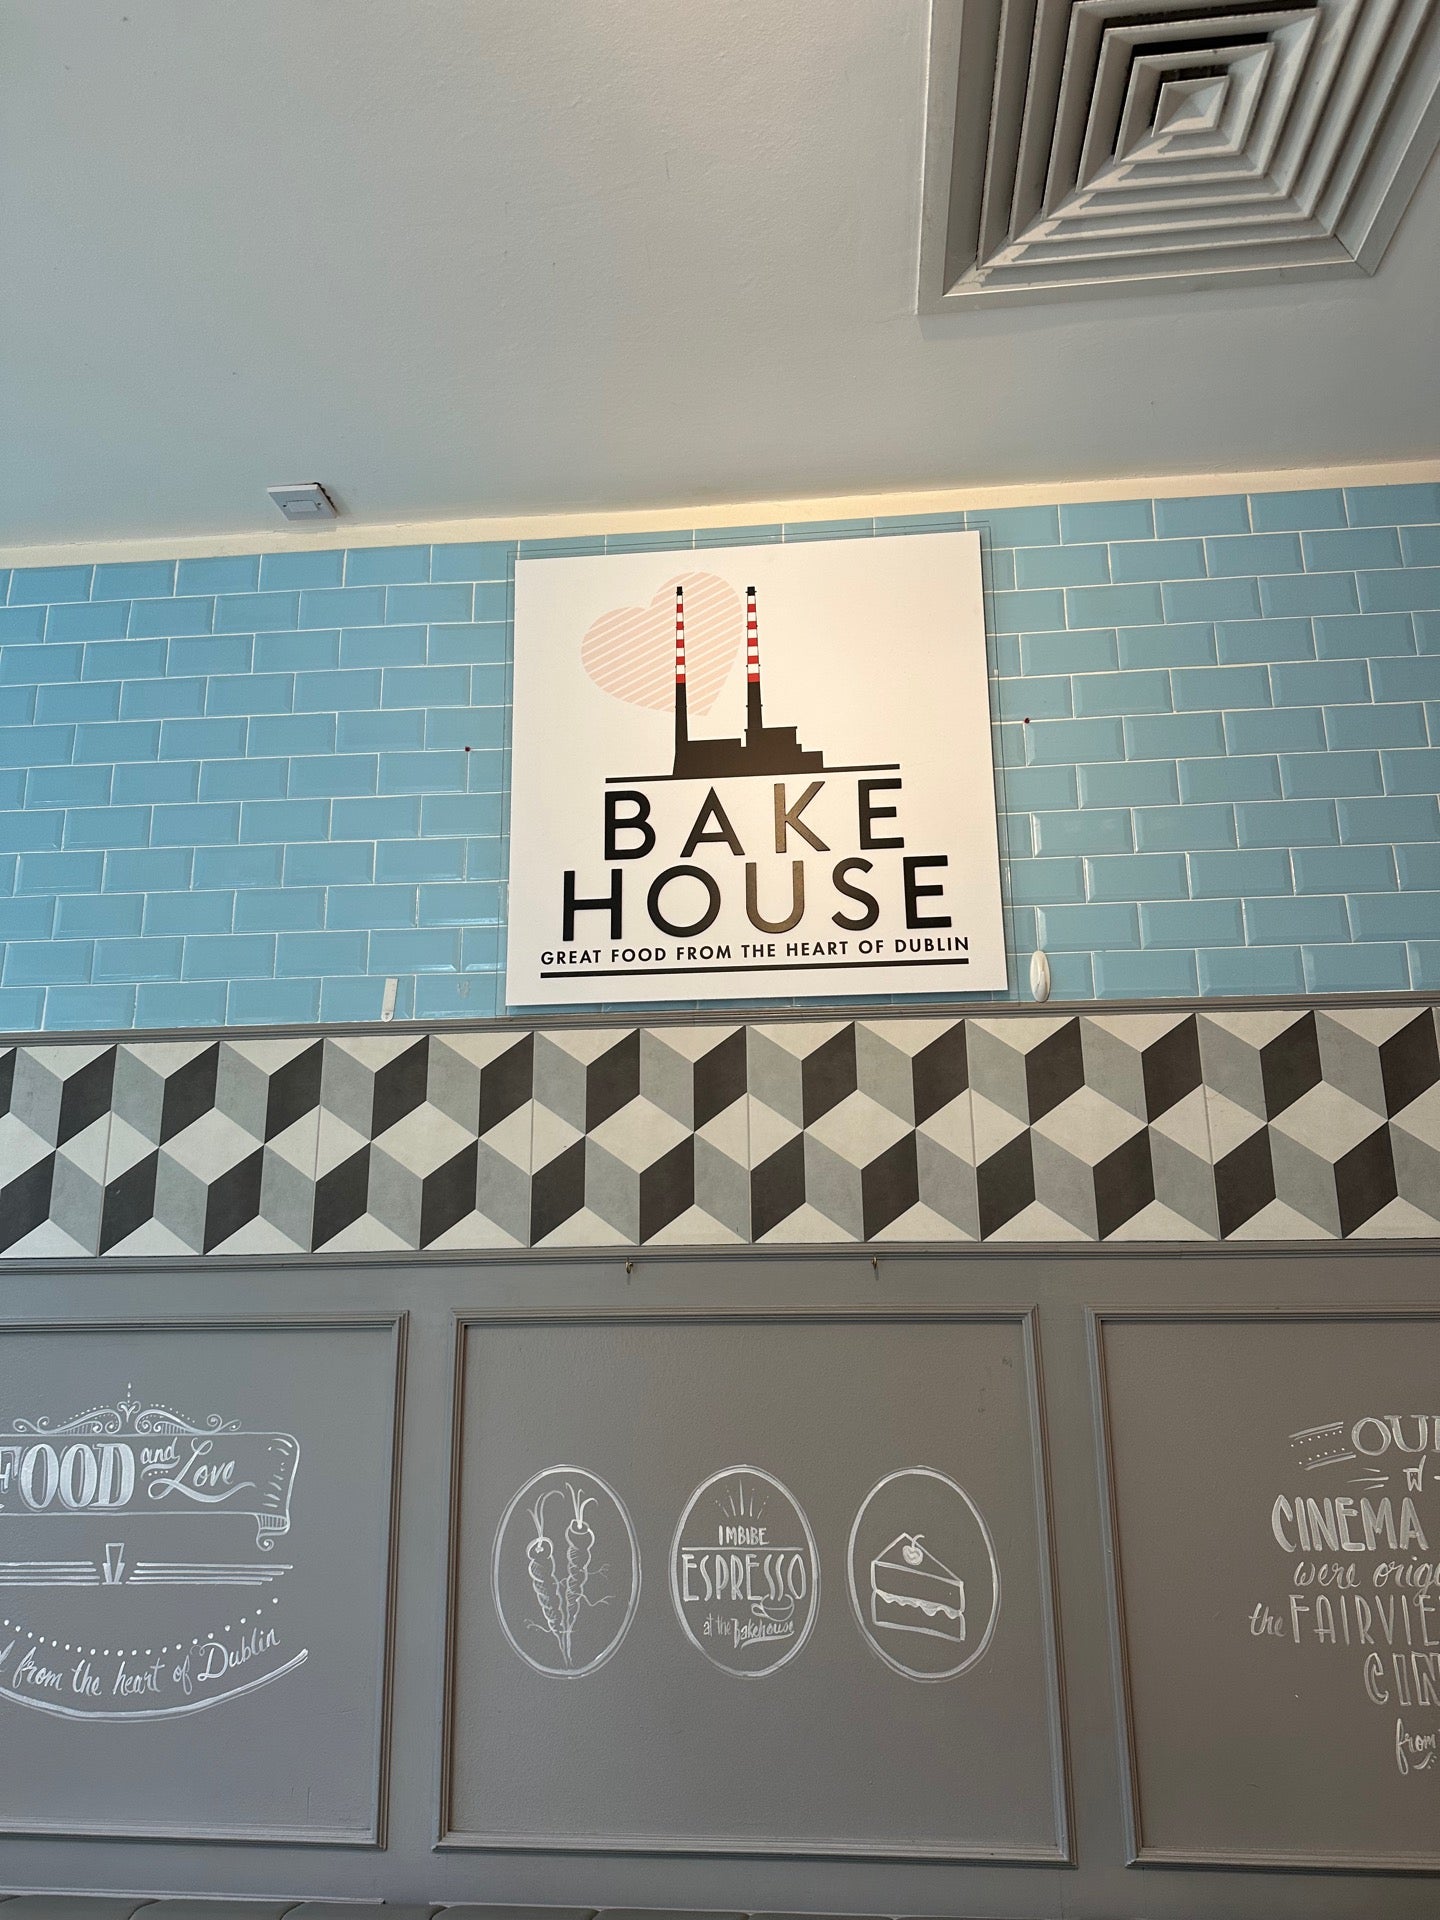 The Bakehouse Express